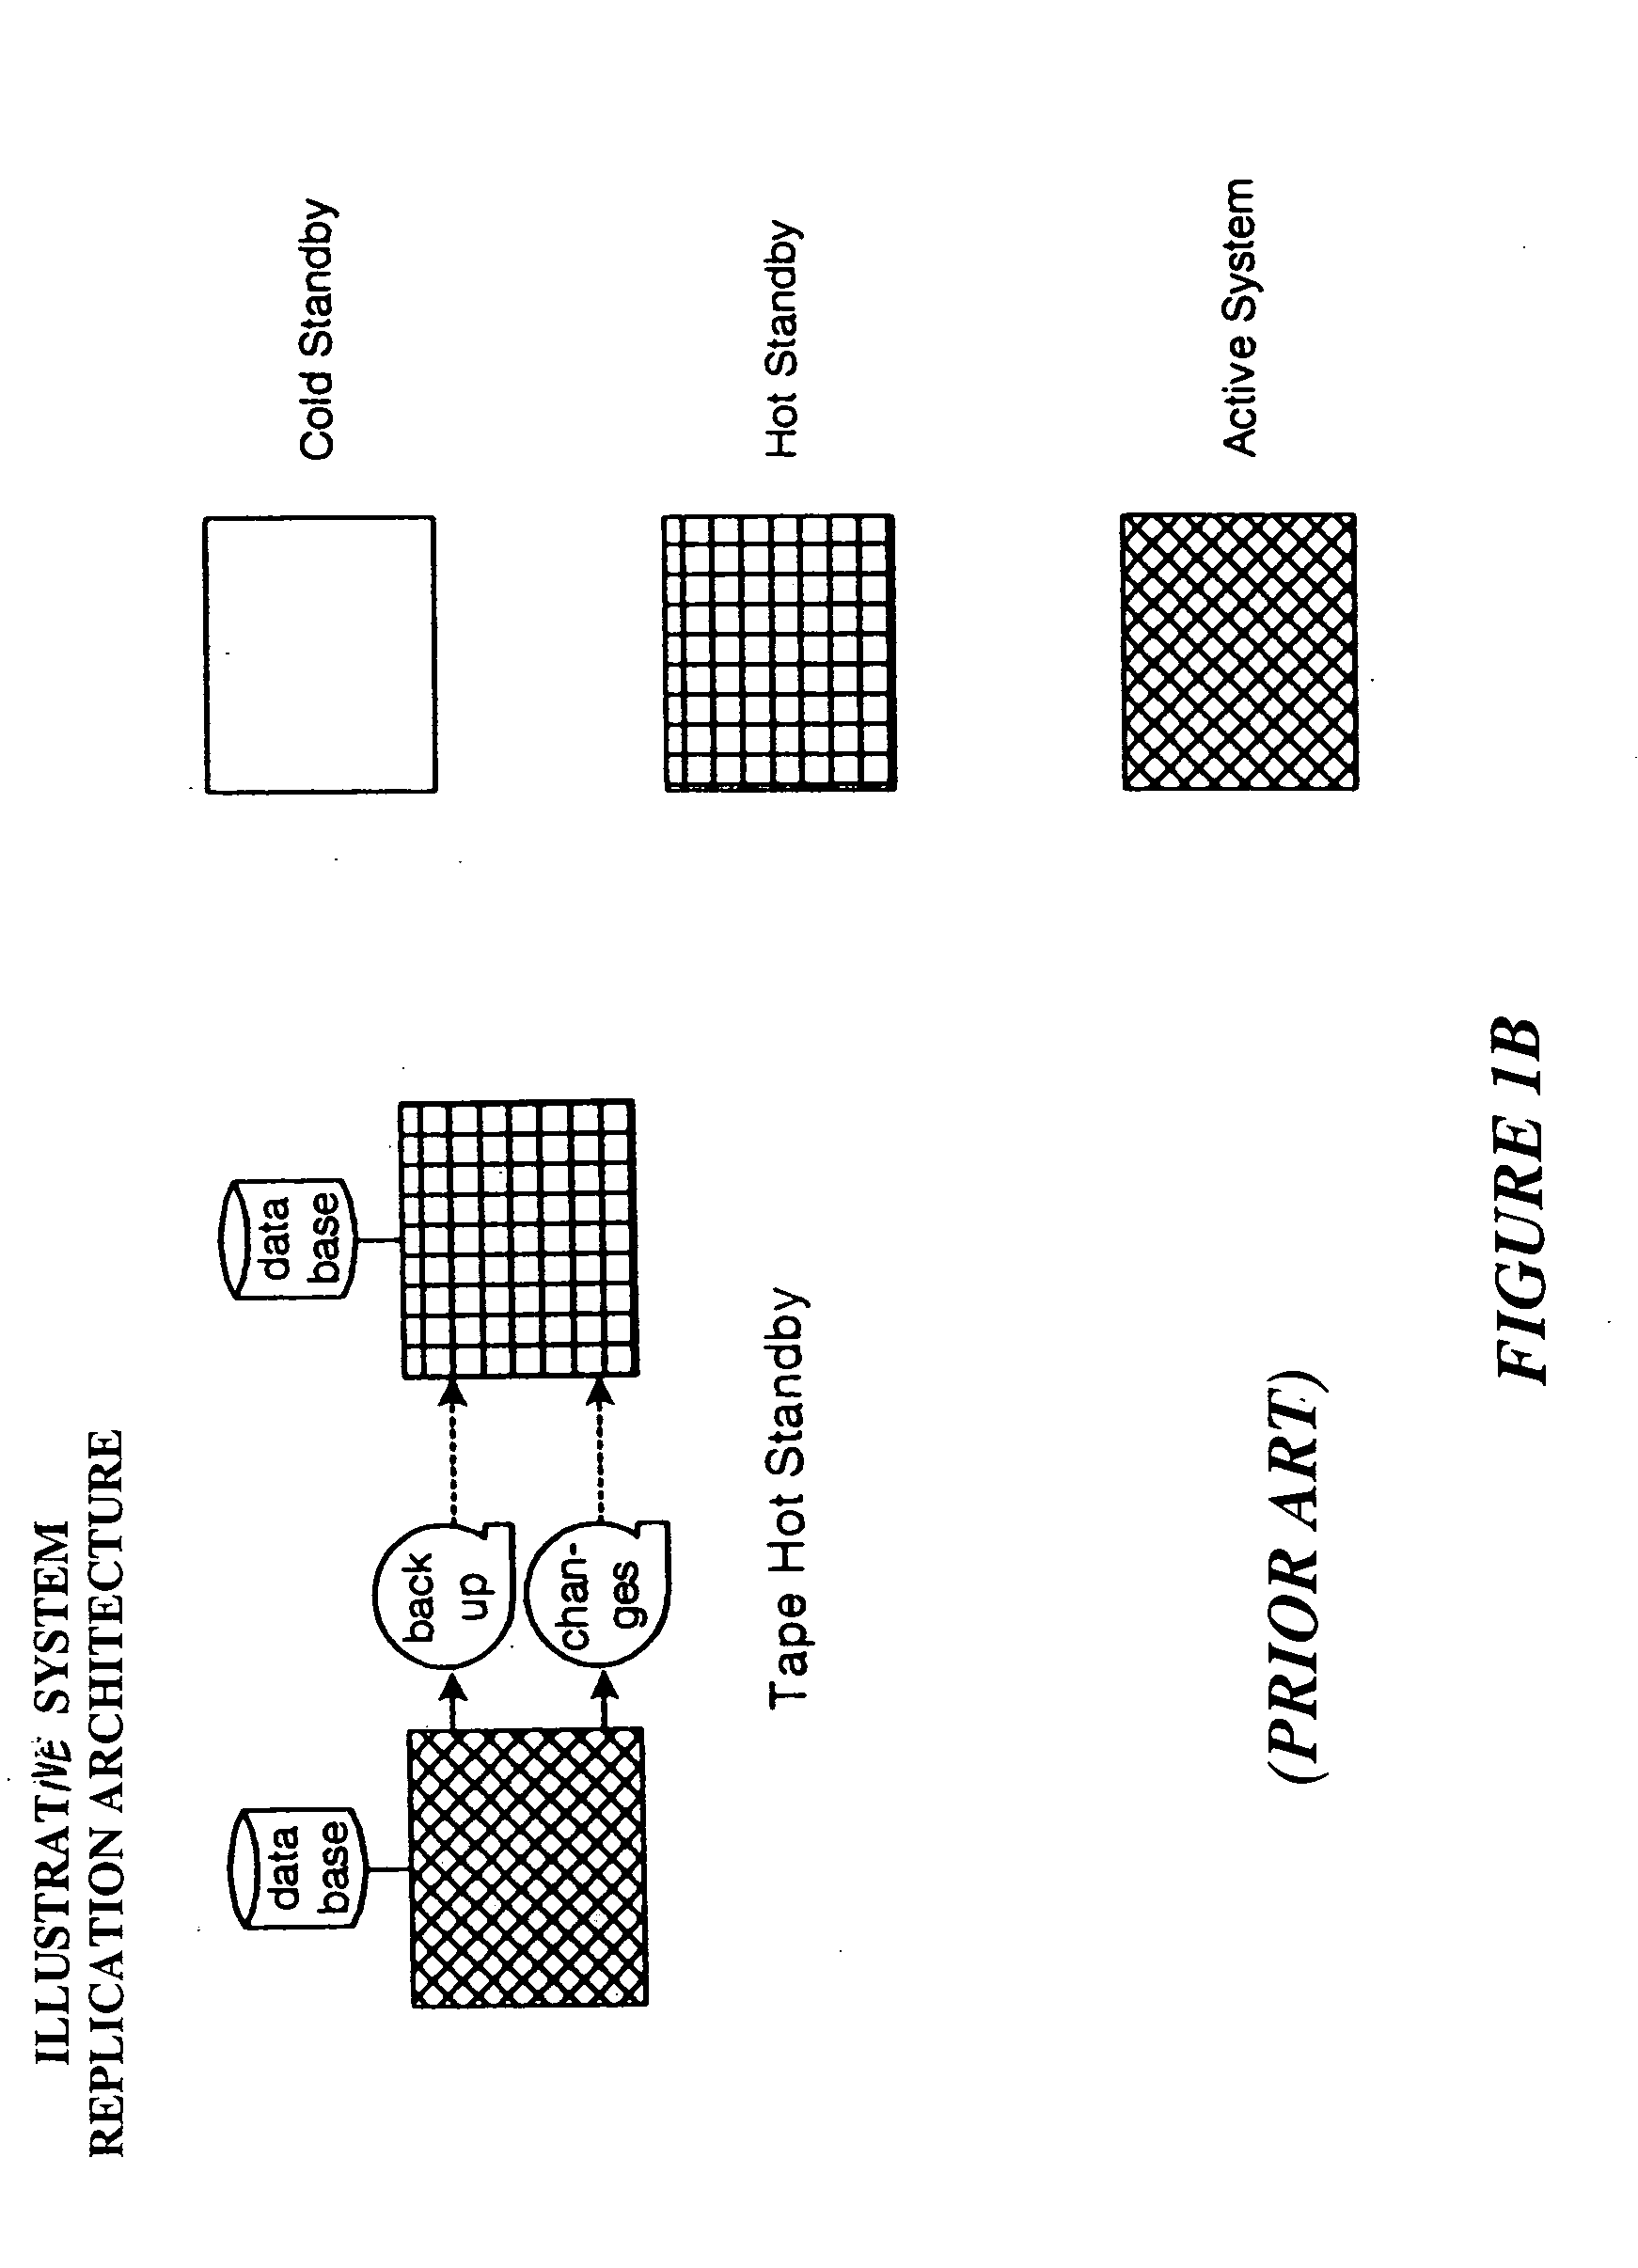 Method for ensuring referential integrity in multi-threaded replication engines